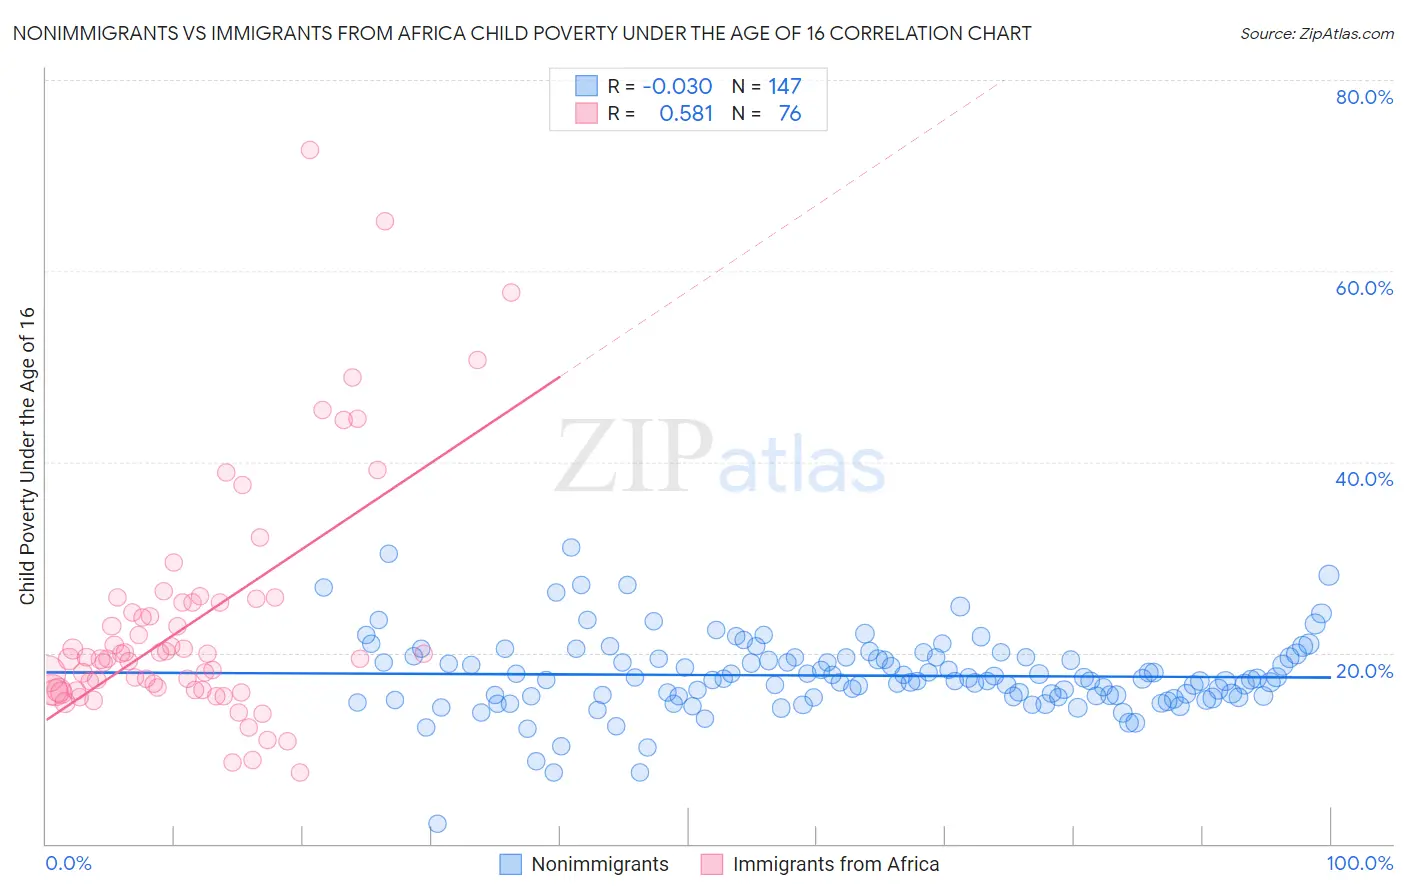 Nonimmigrants vs Immigrants from Africa Child Poverty Under the Age of 16